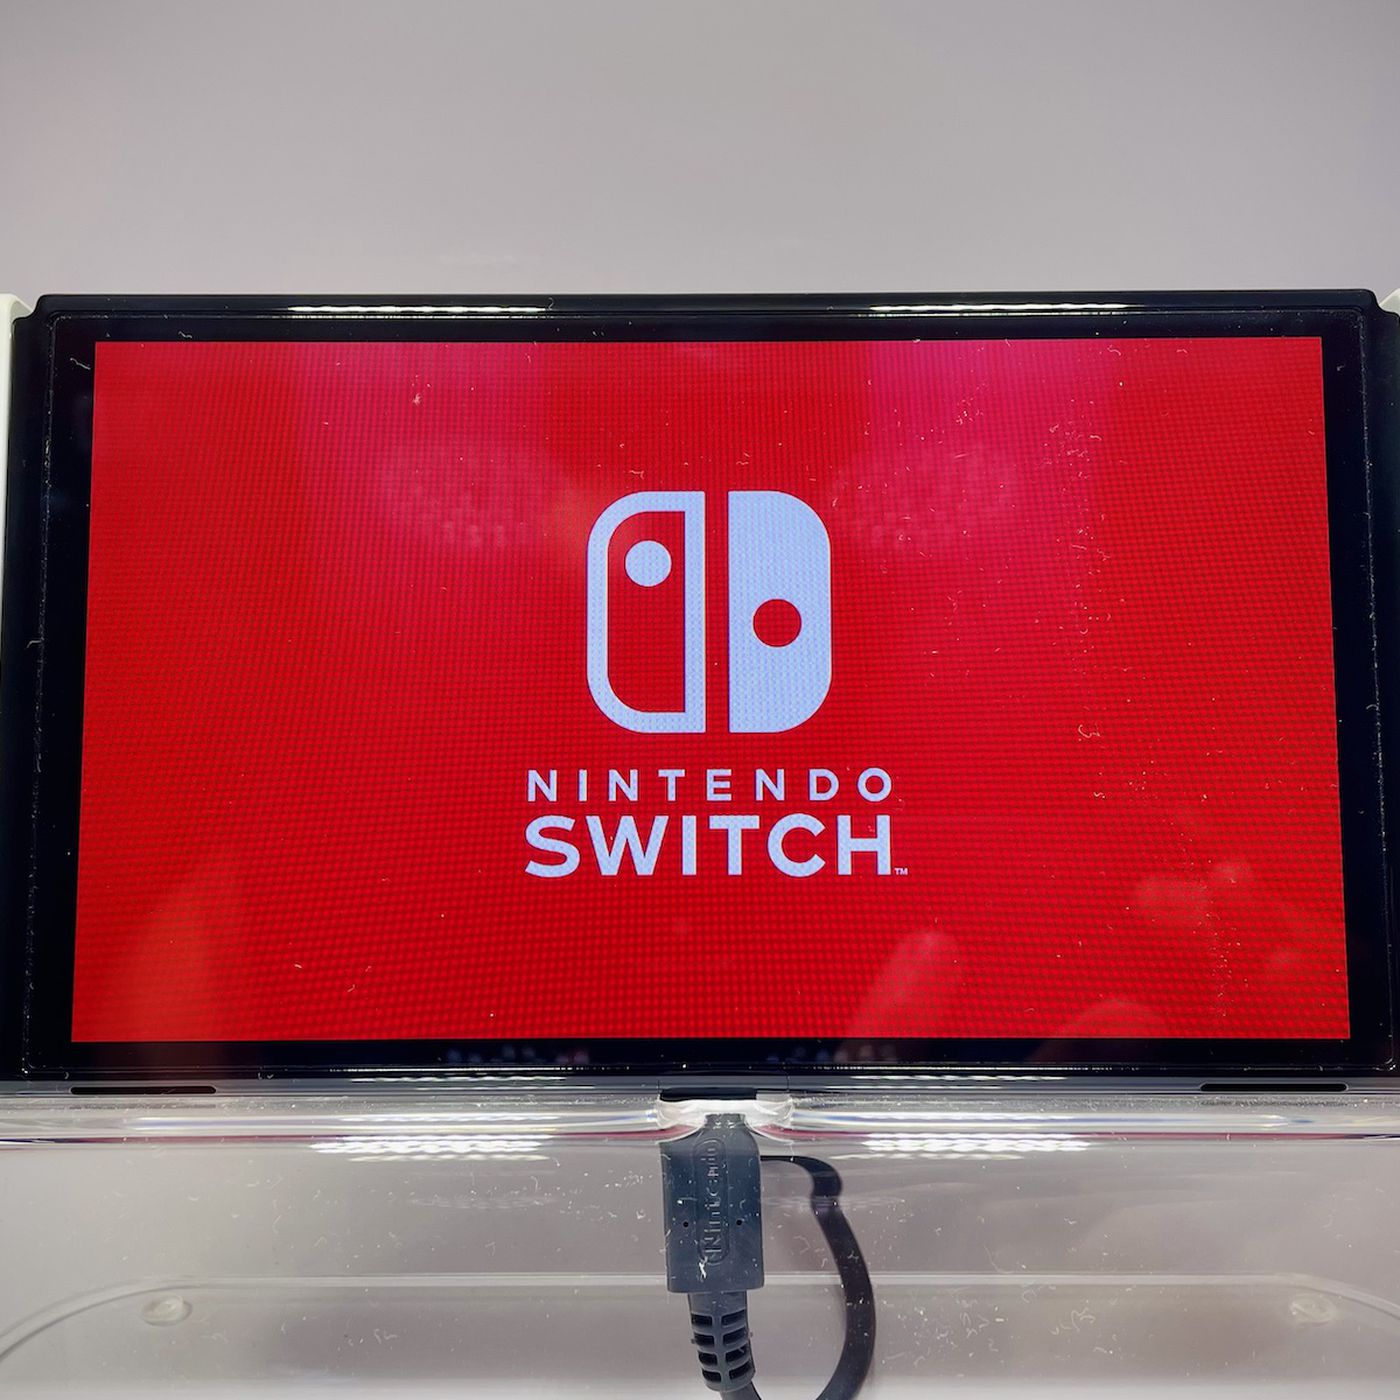  Nintendo Switch designers say they as of now have 4K dev kits